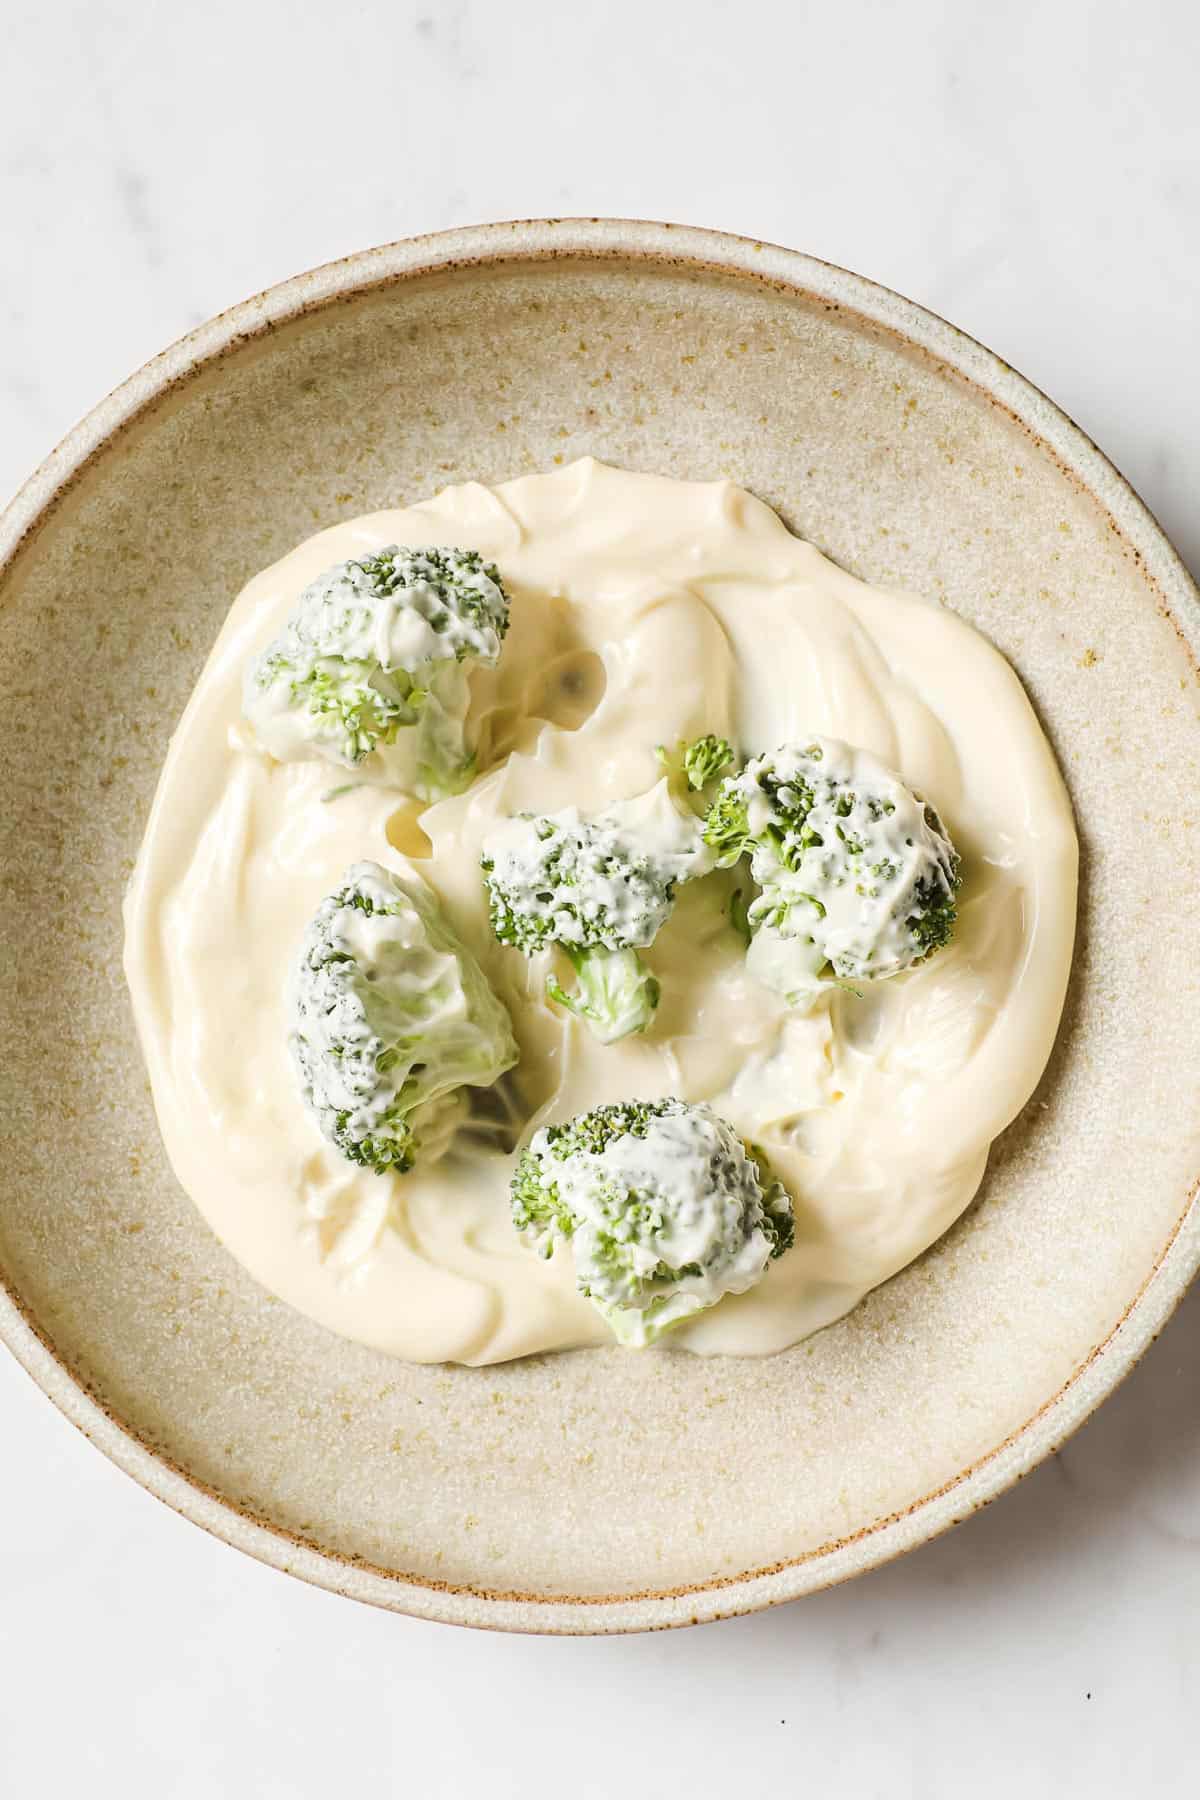 a bowl with mayo and mayo coated broccoli florets.